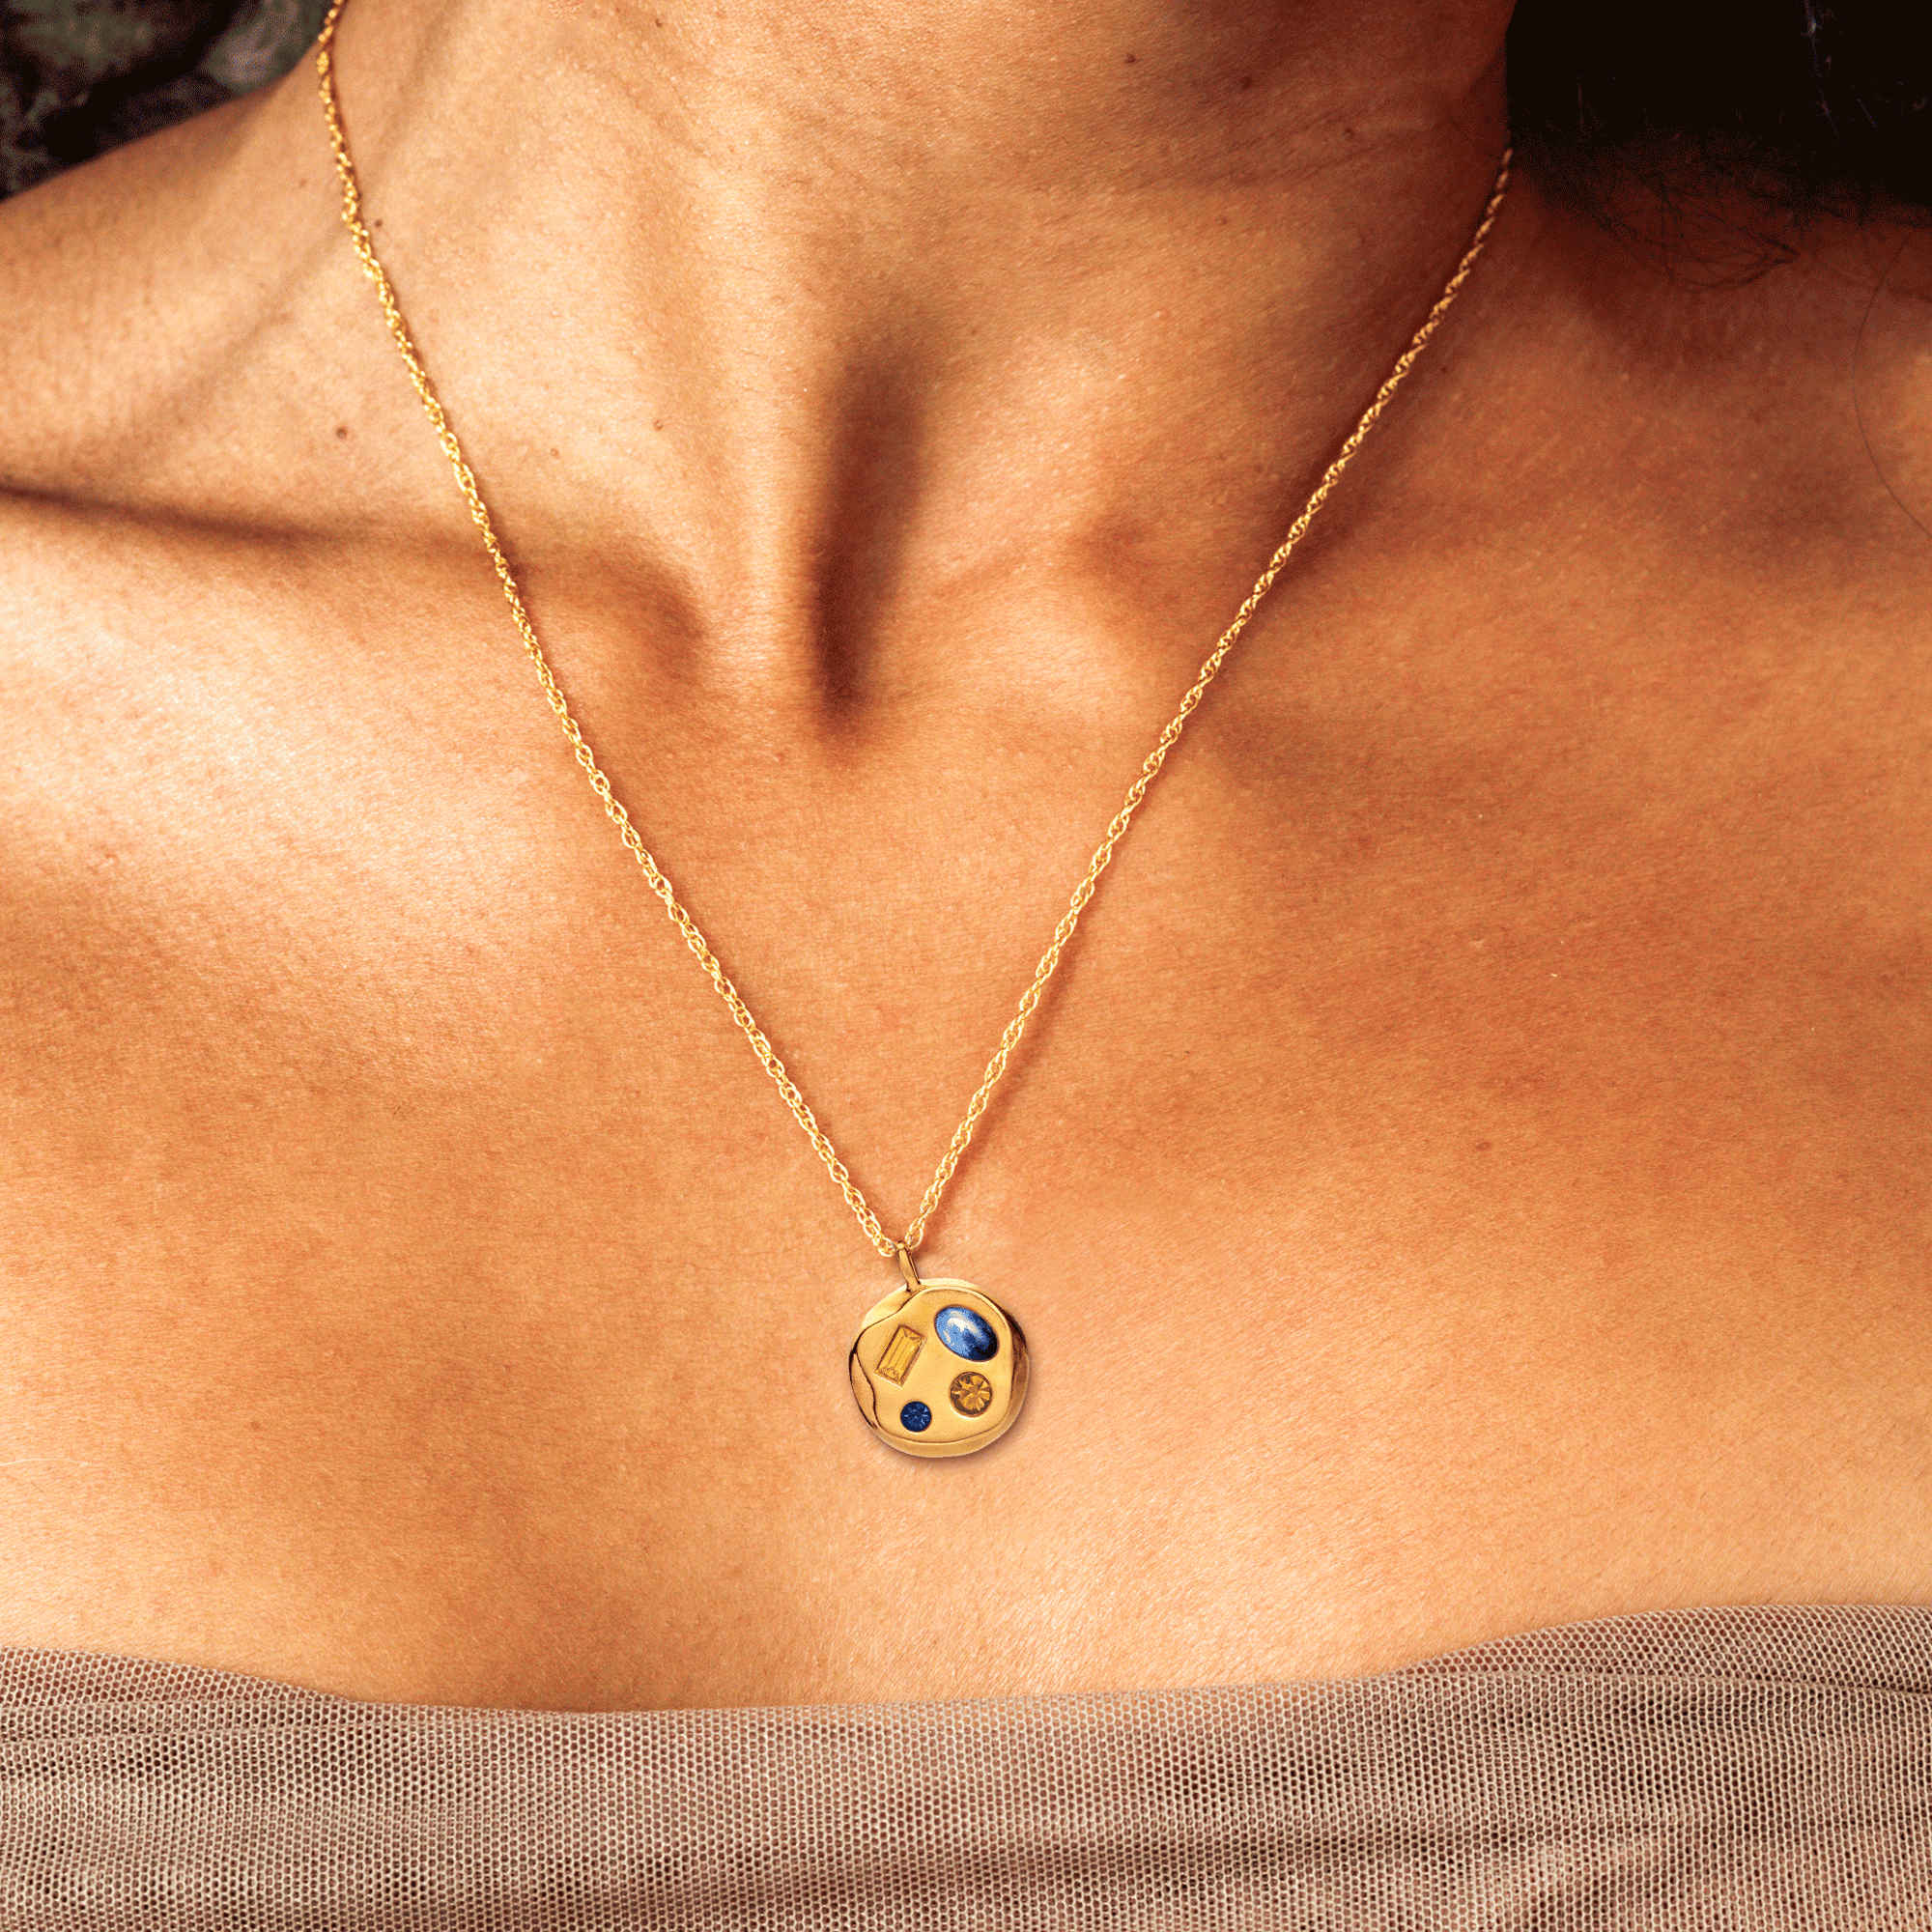 Person wearing The November Sixth Pendant